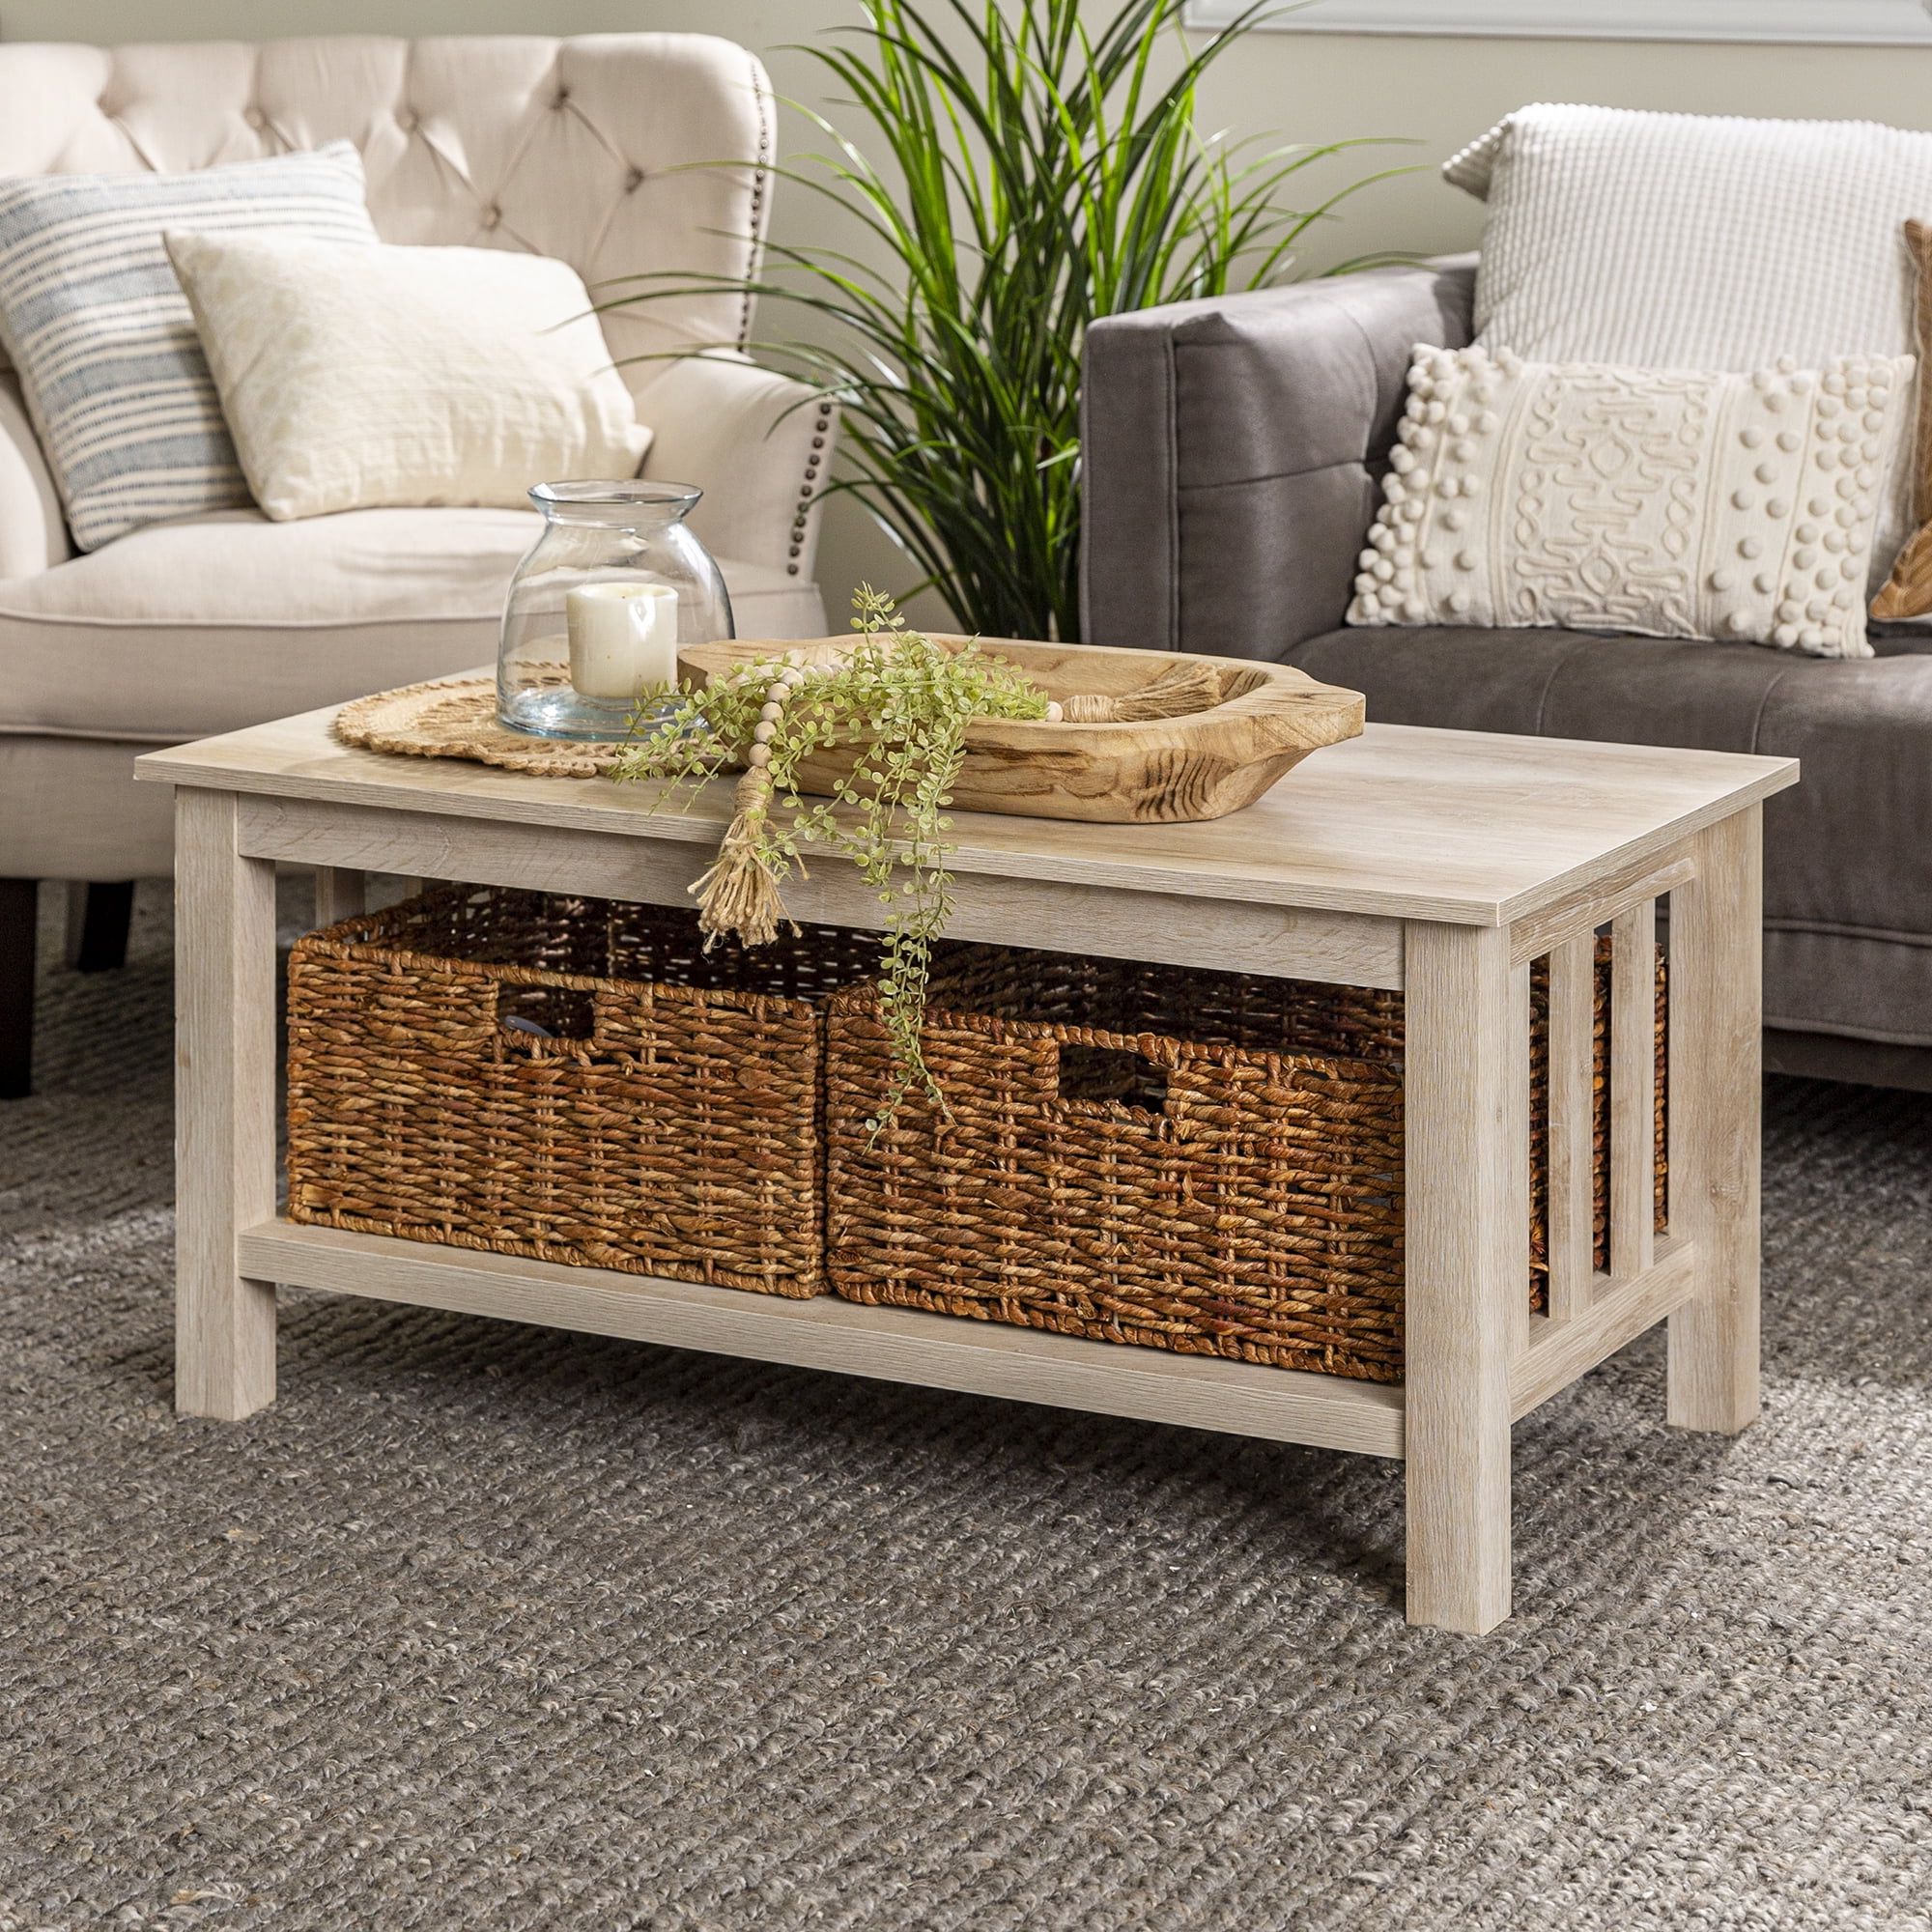 Woven Paths Traditional Storage Coffee Table With Bins, White Oak With Regard To Woven Paths Coffee Tables (Gallery 3 of 20)